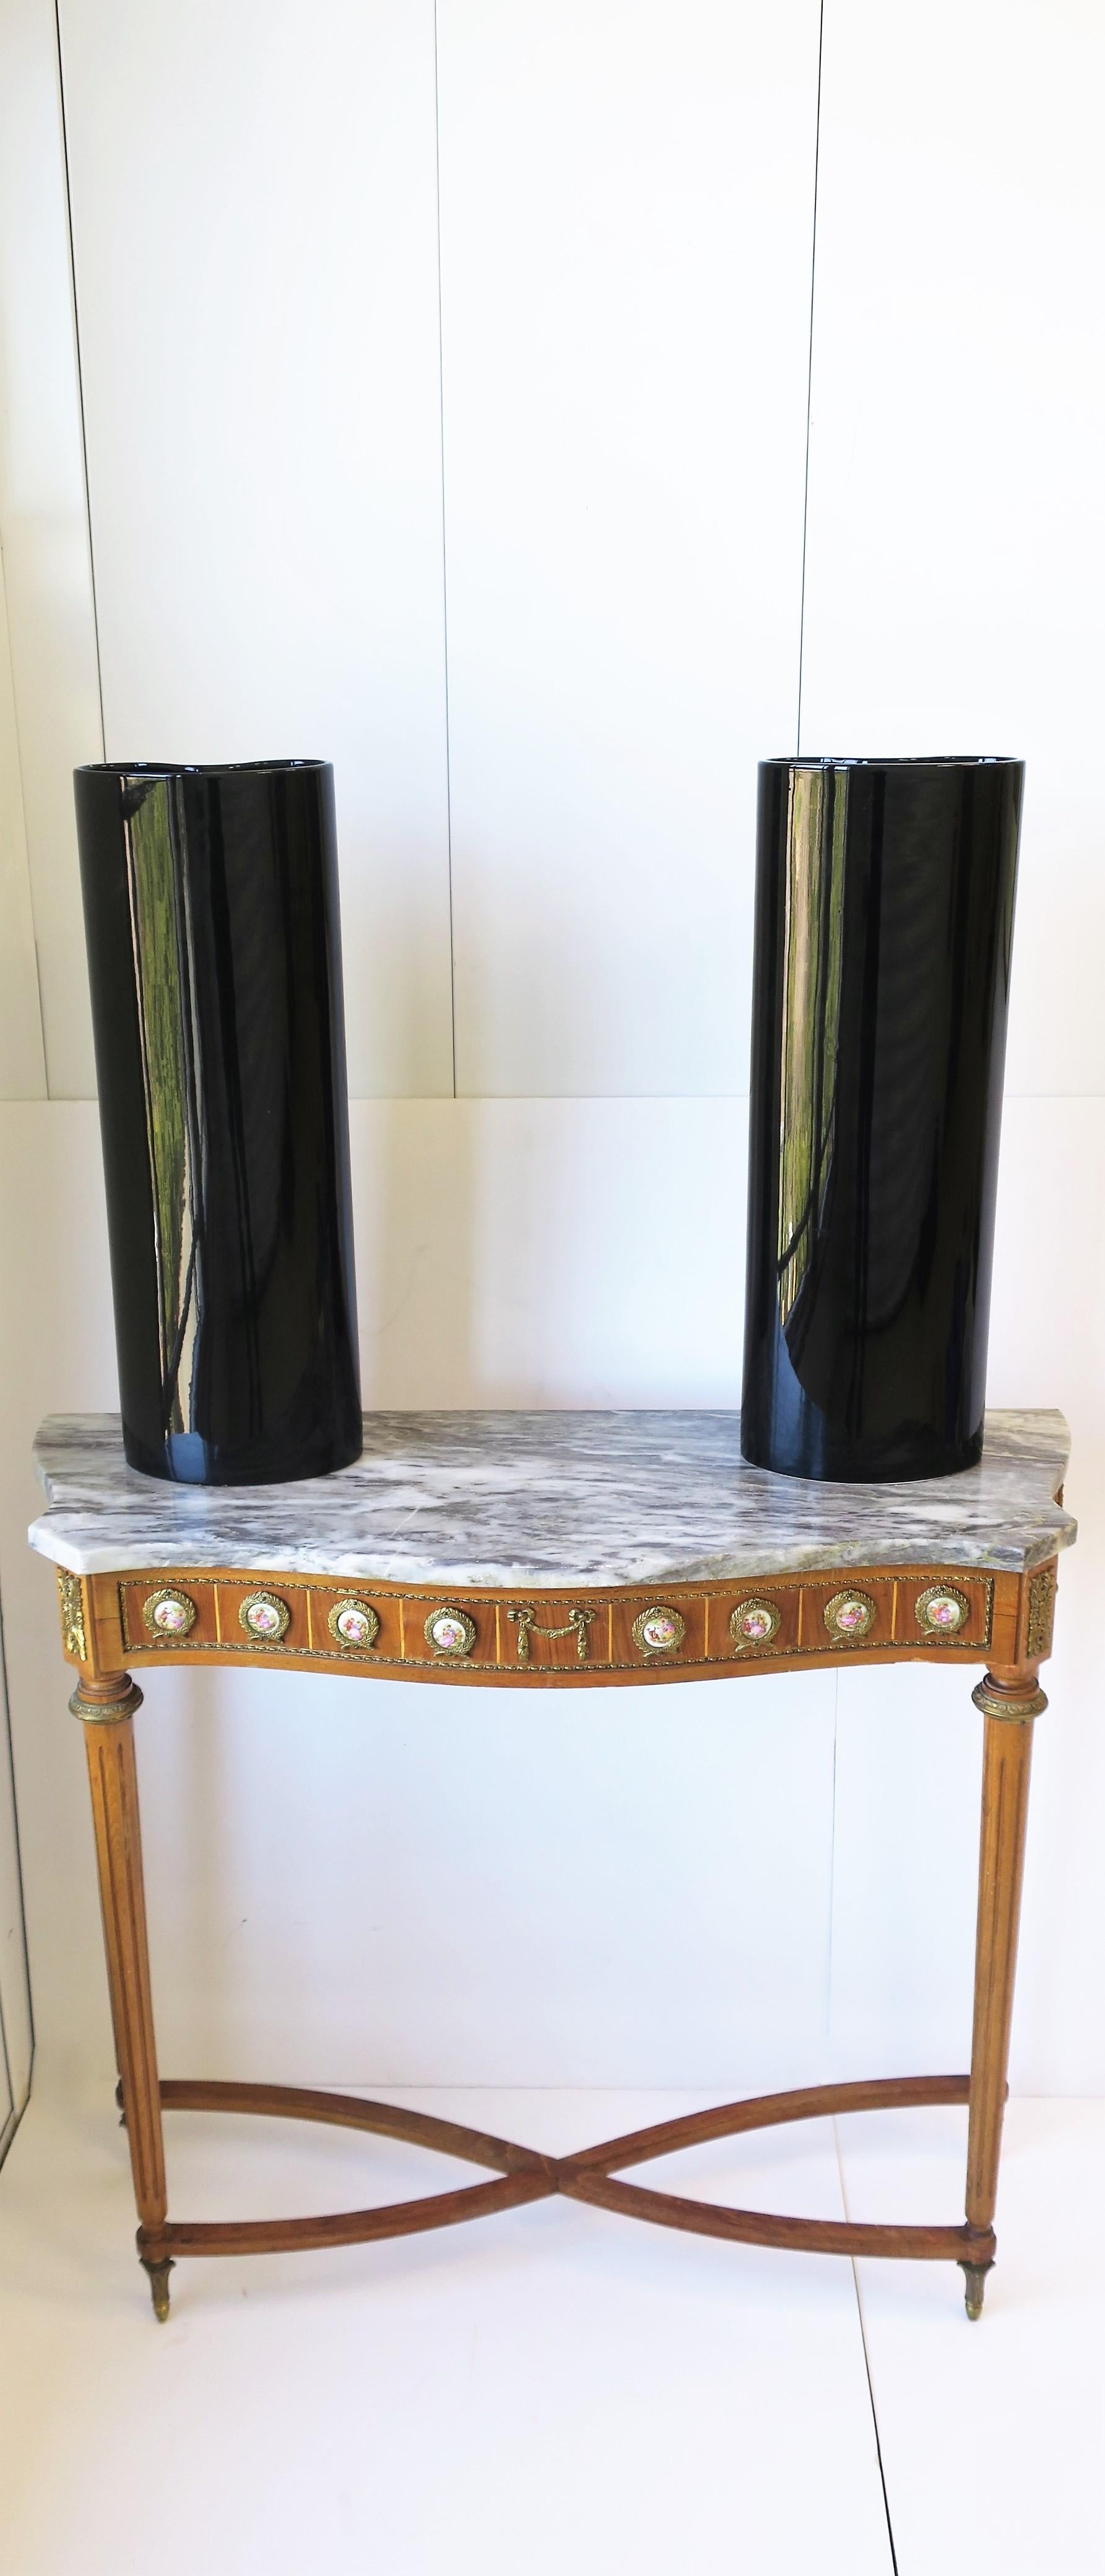 Portuguese Black Vases Organic Modern Style Euro '90s, Pair For Sale